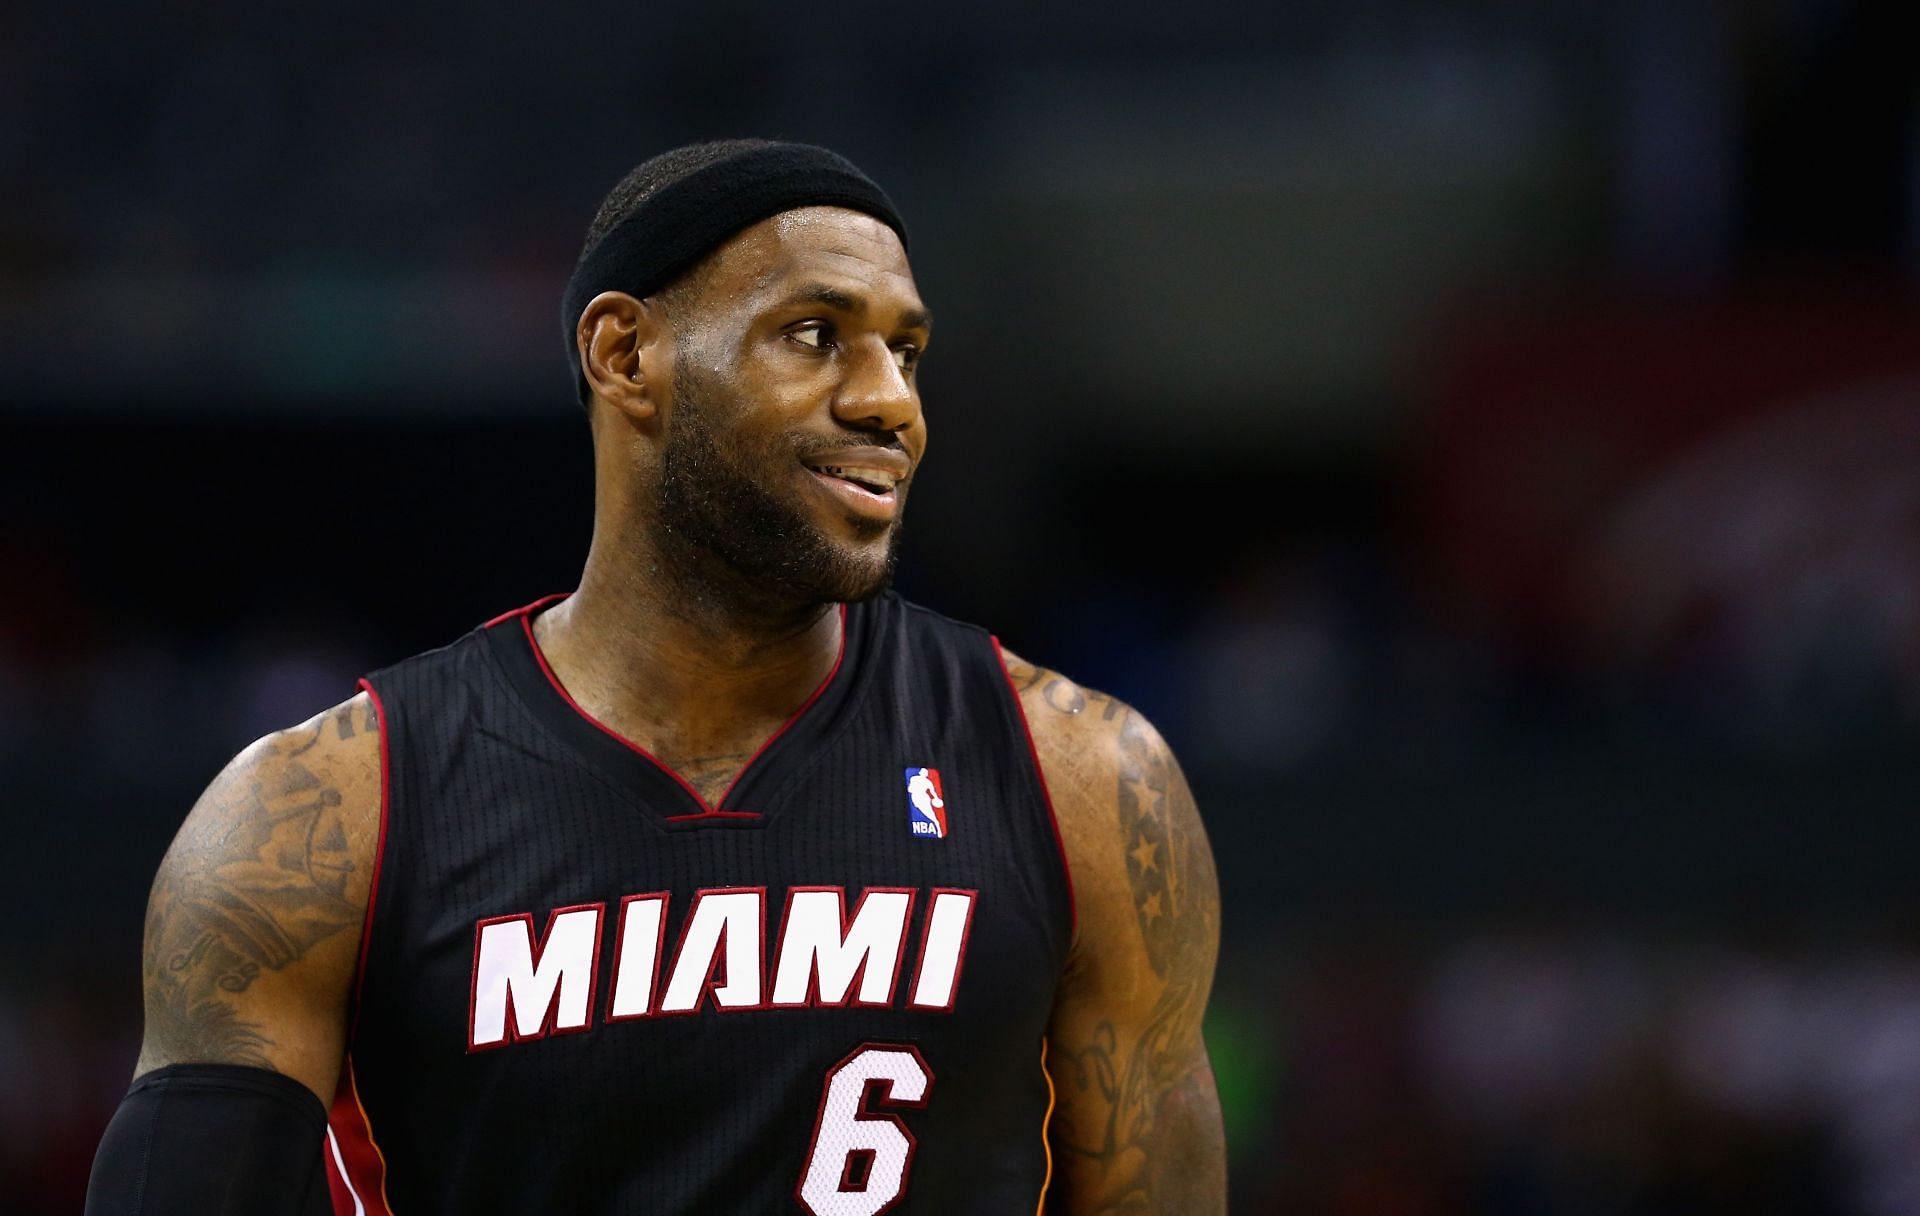 How has LeBron James' weight changed since his NBA debut? Looking at